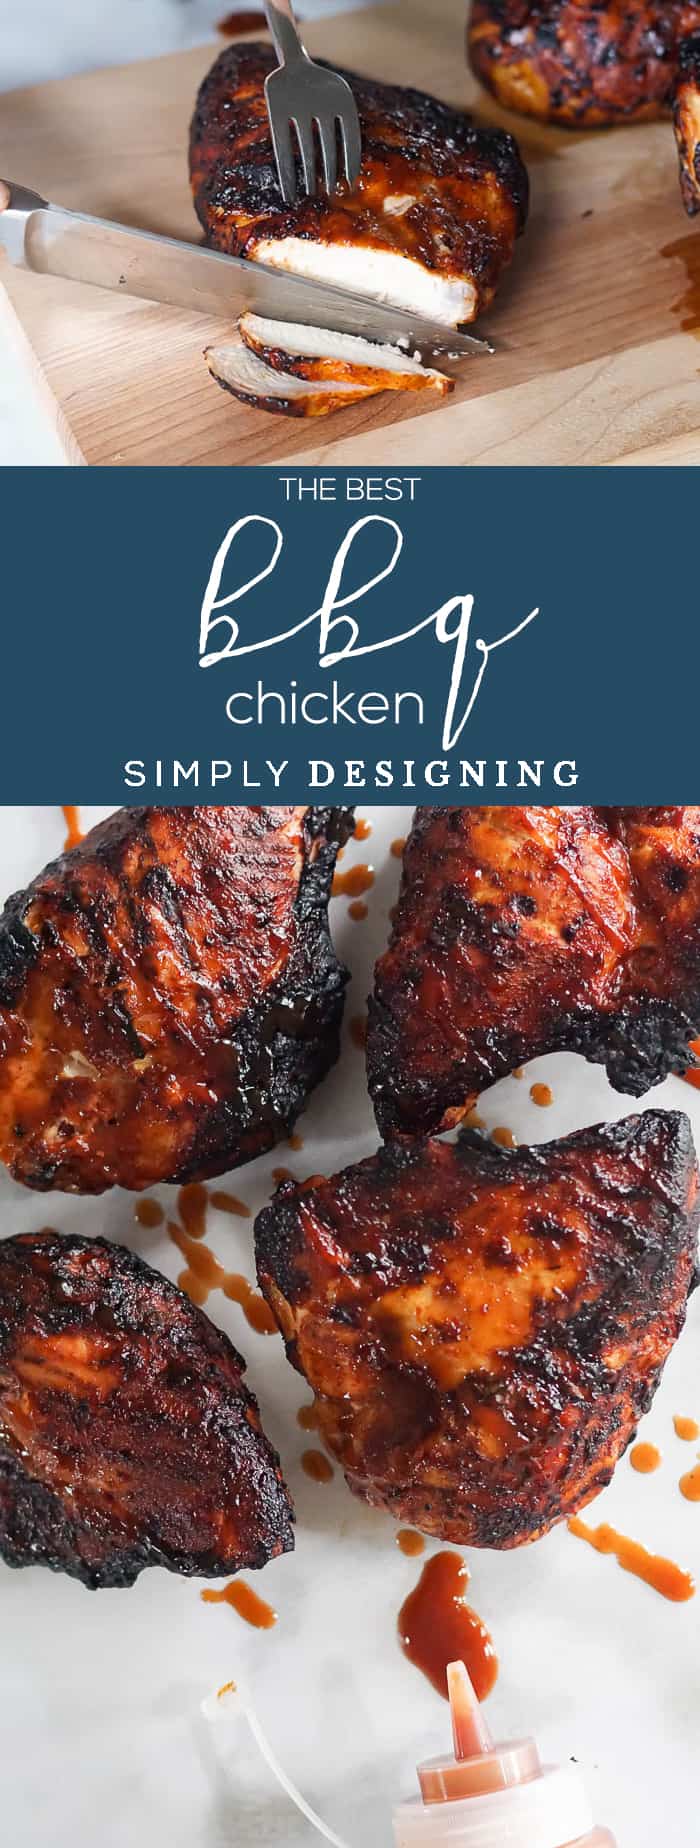 The BEST BBQ Chicken - this grilled chicken recipe is full of delicious bbq flavor and is so easy to make